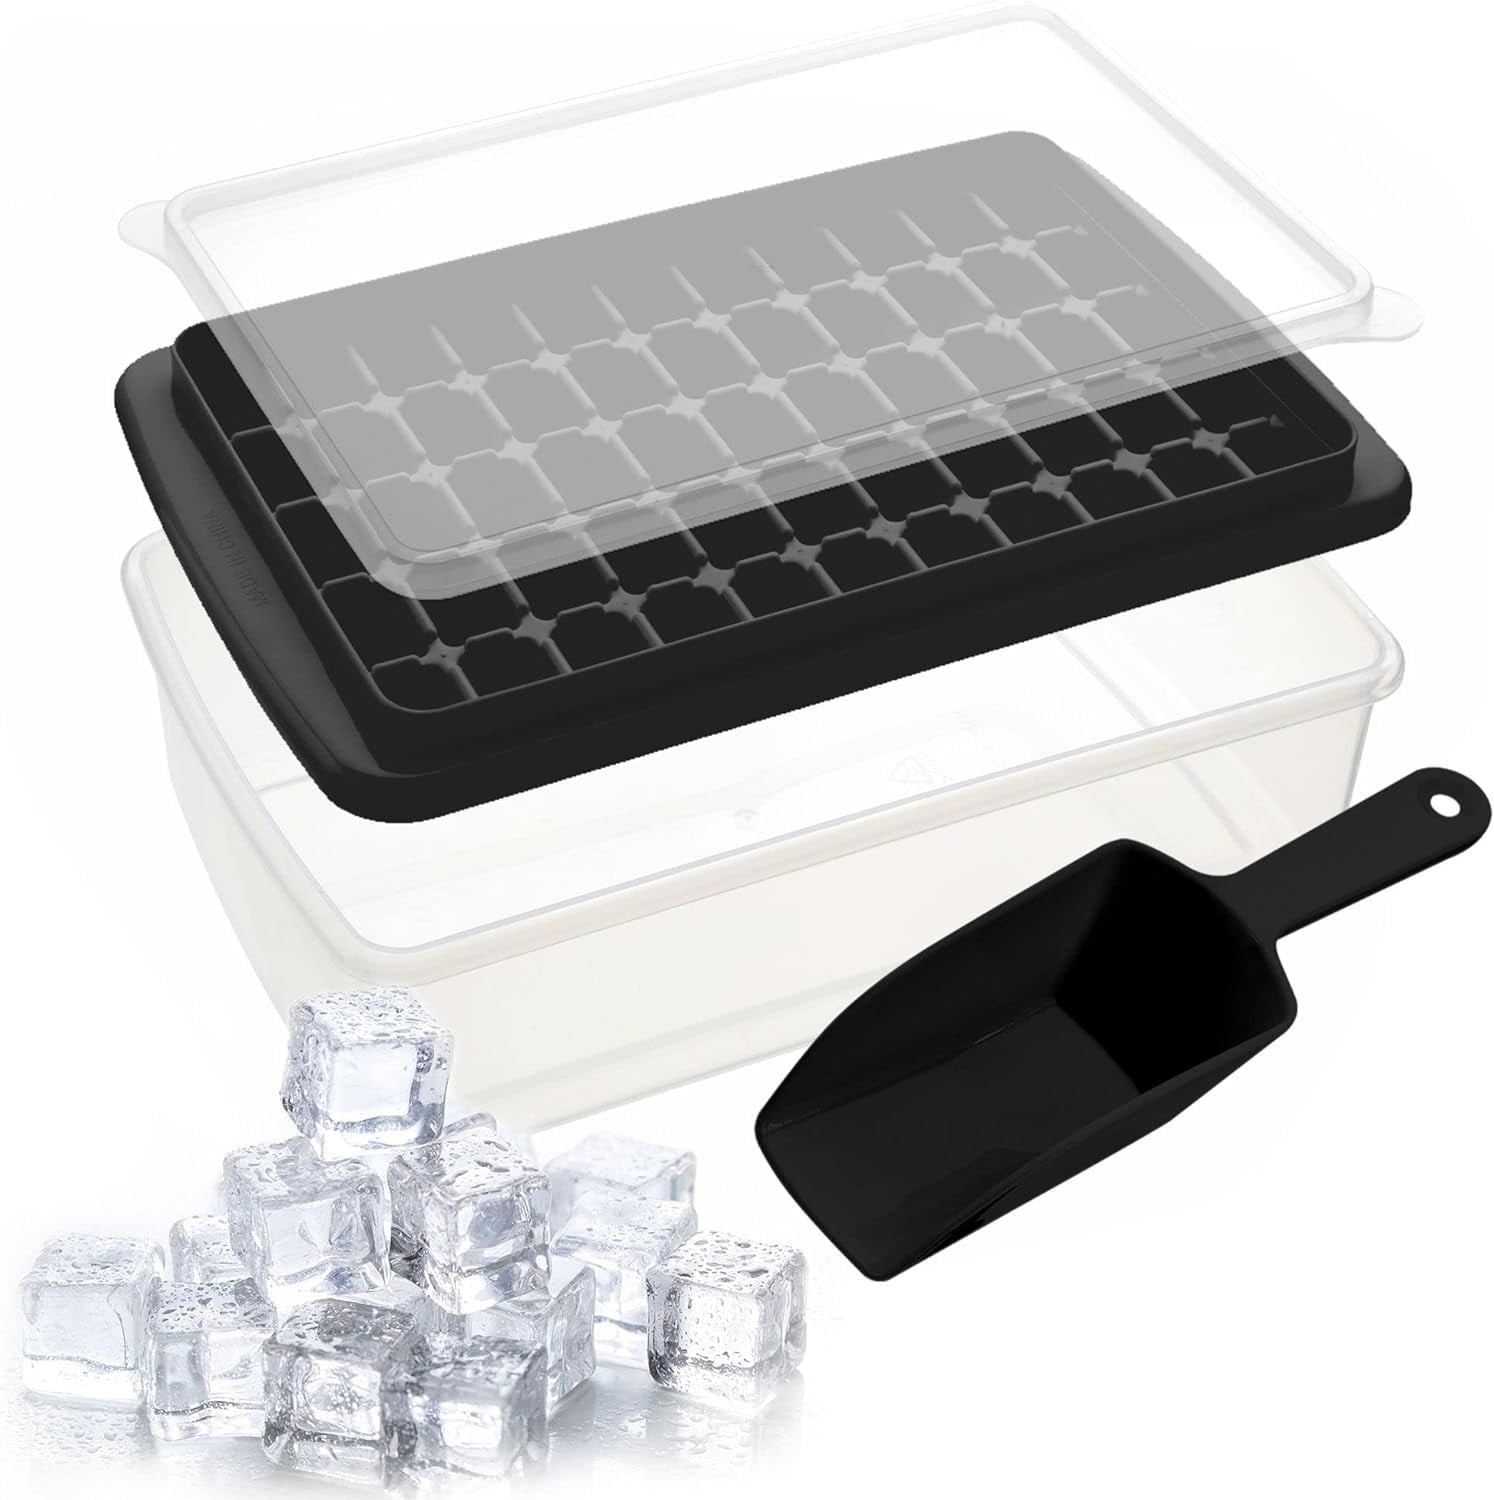 Yoove Ice Cube Tray with Lid and Container - 55 Nuggets Ice Tray Mold for Freezer Black